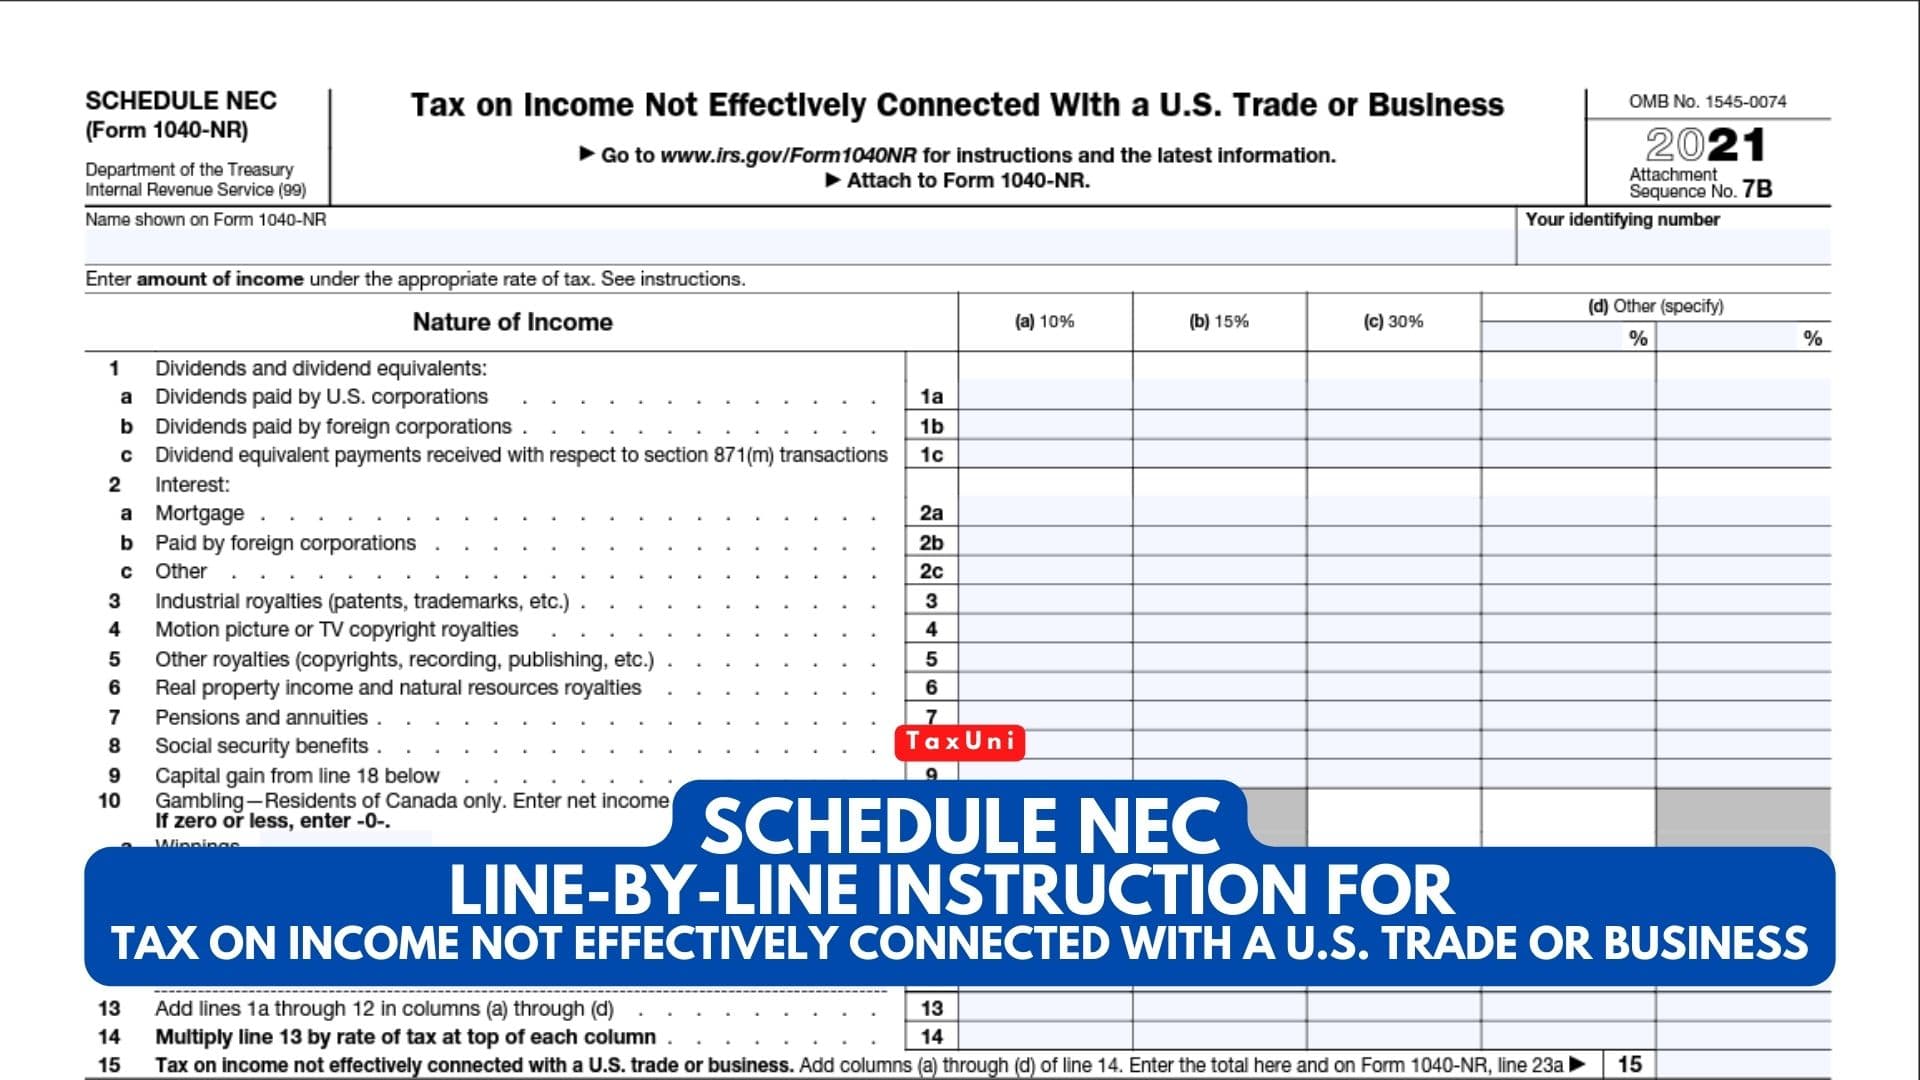 Schedule-NEC-Line-by-Line-Instruction-For-Tax-on-Income-Not-Effectively-Connected-With-a-U.S.-Trade-or-Business-TaxUni-Cover-1